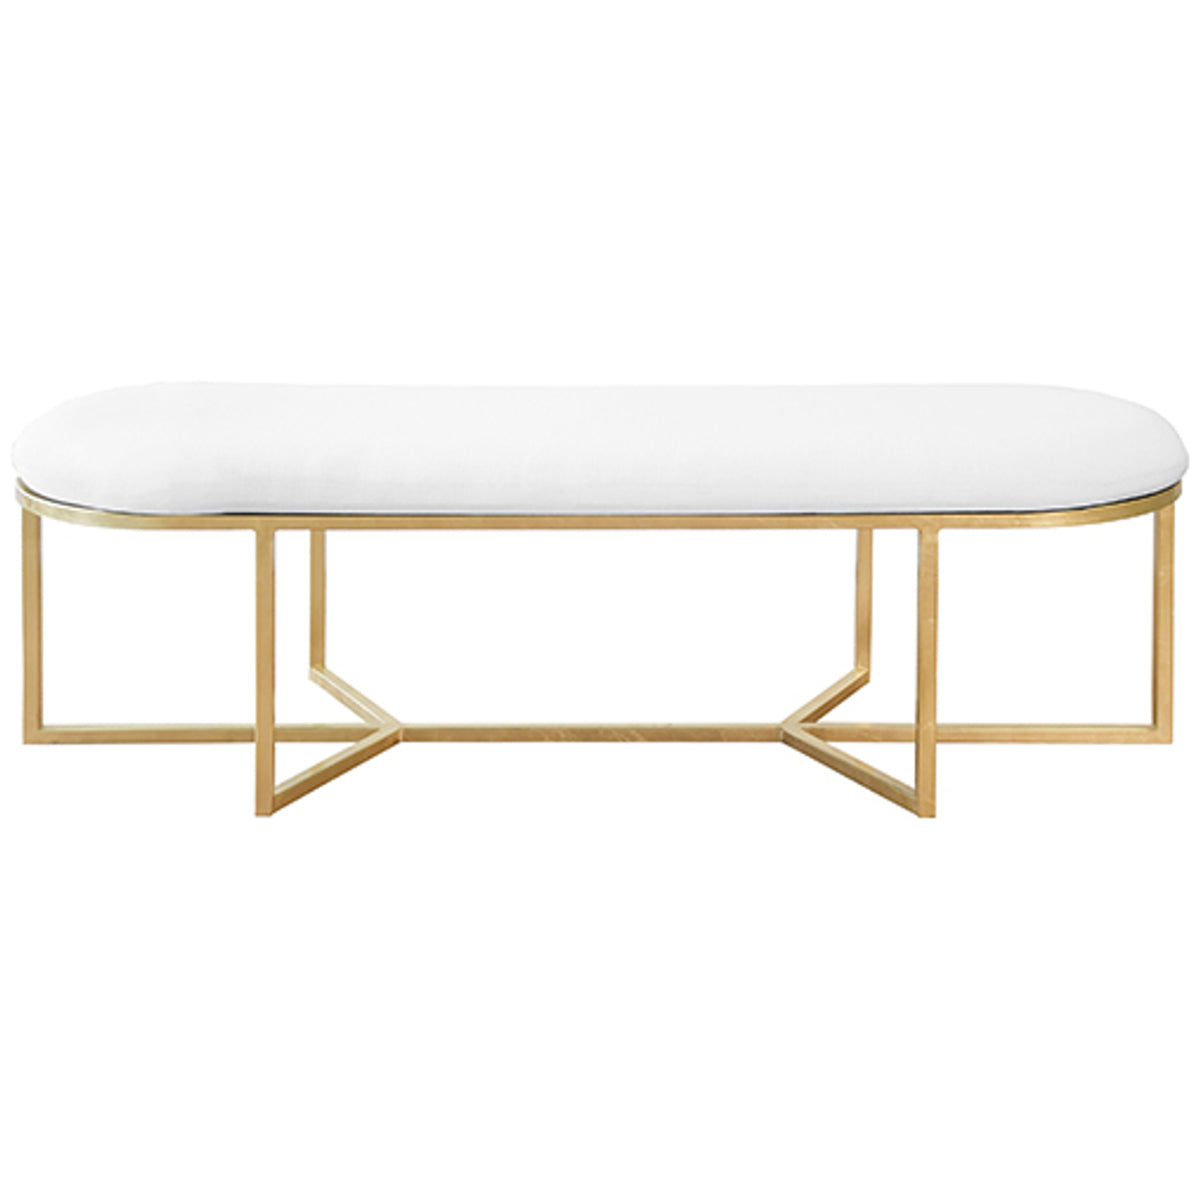 Worlds Away Oval Bench with White Linen Cushion and Iron Base